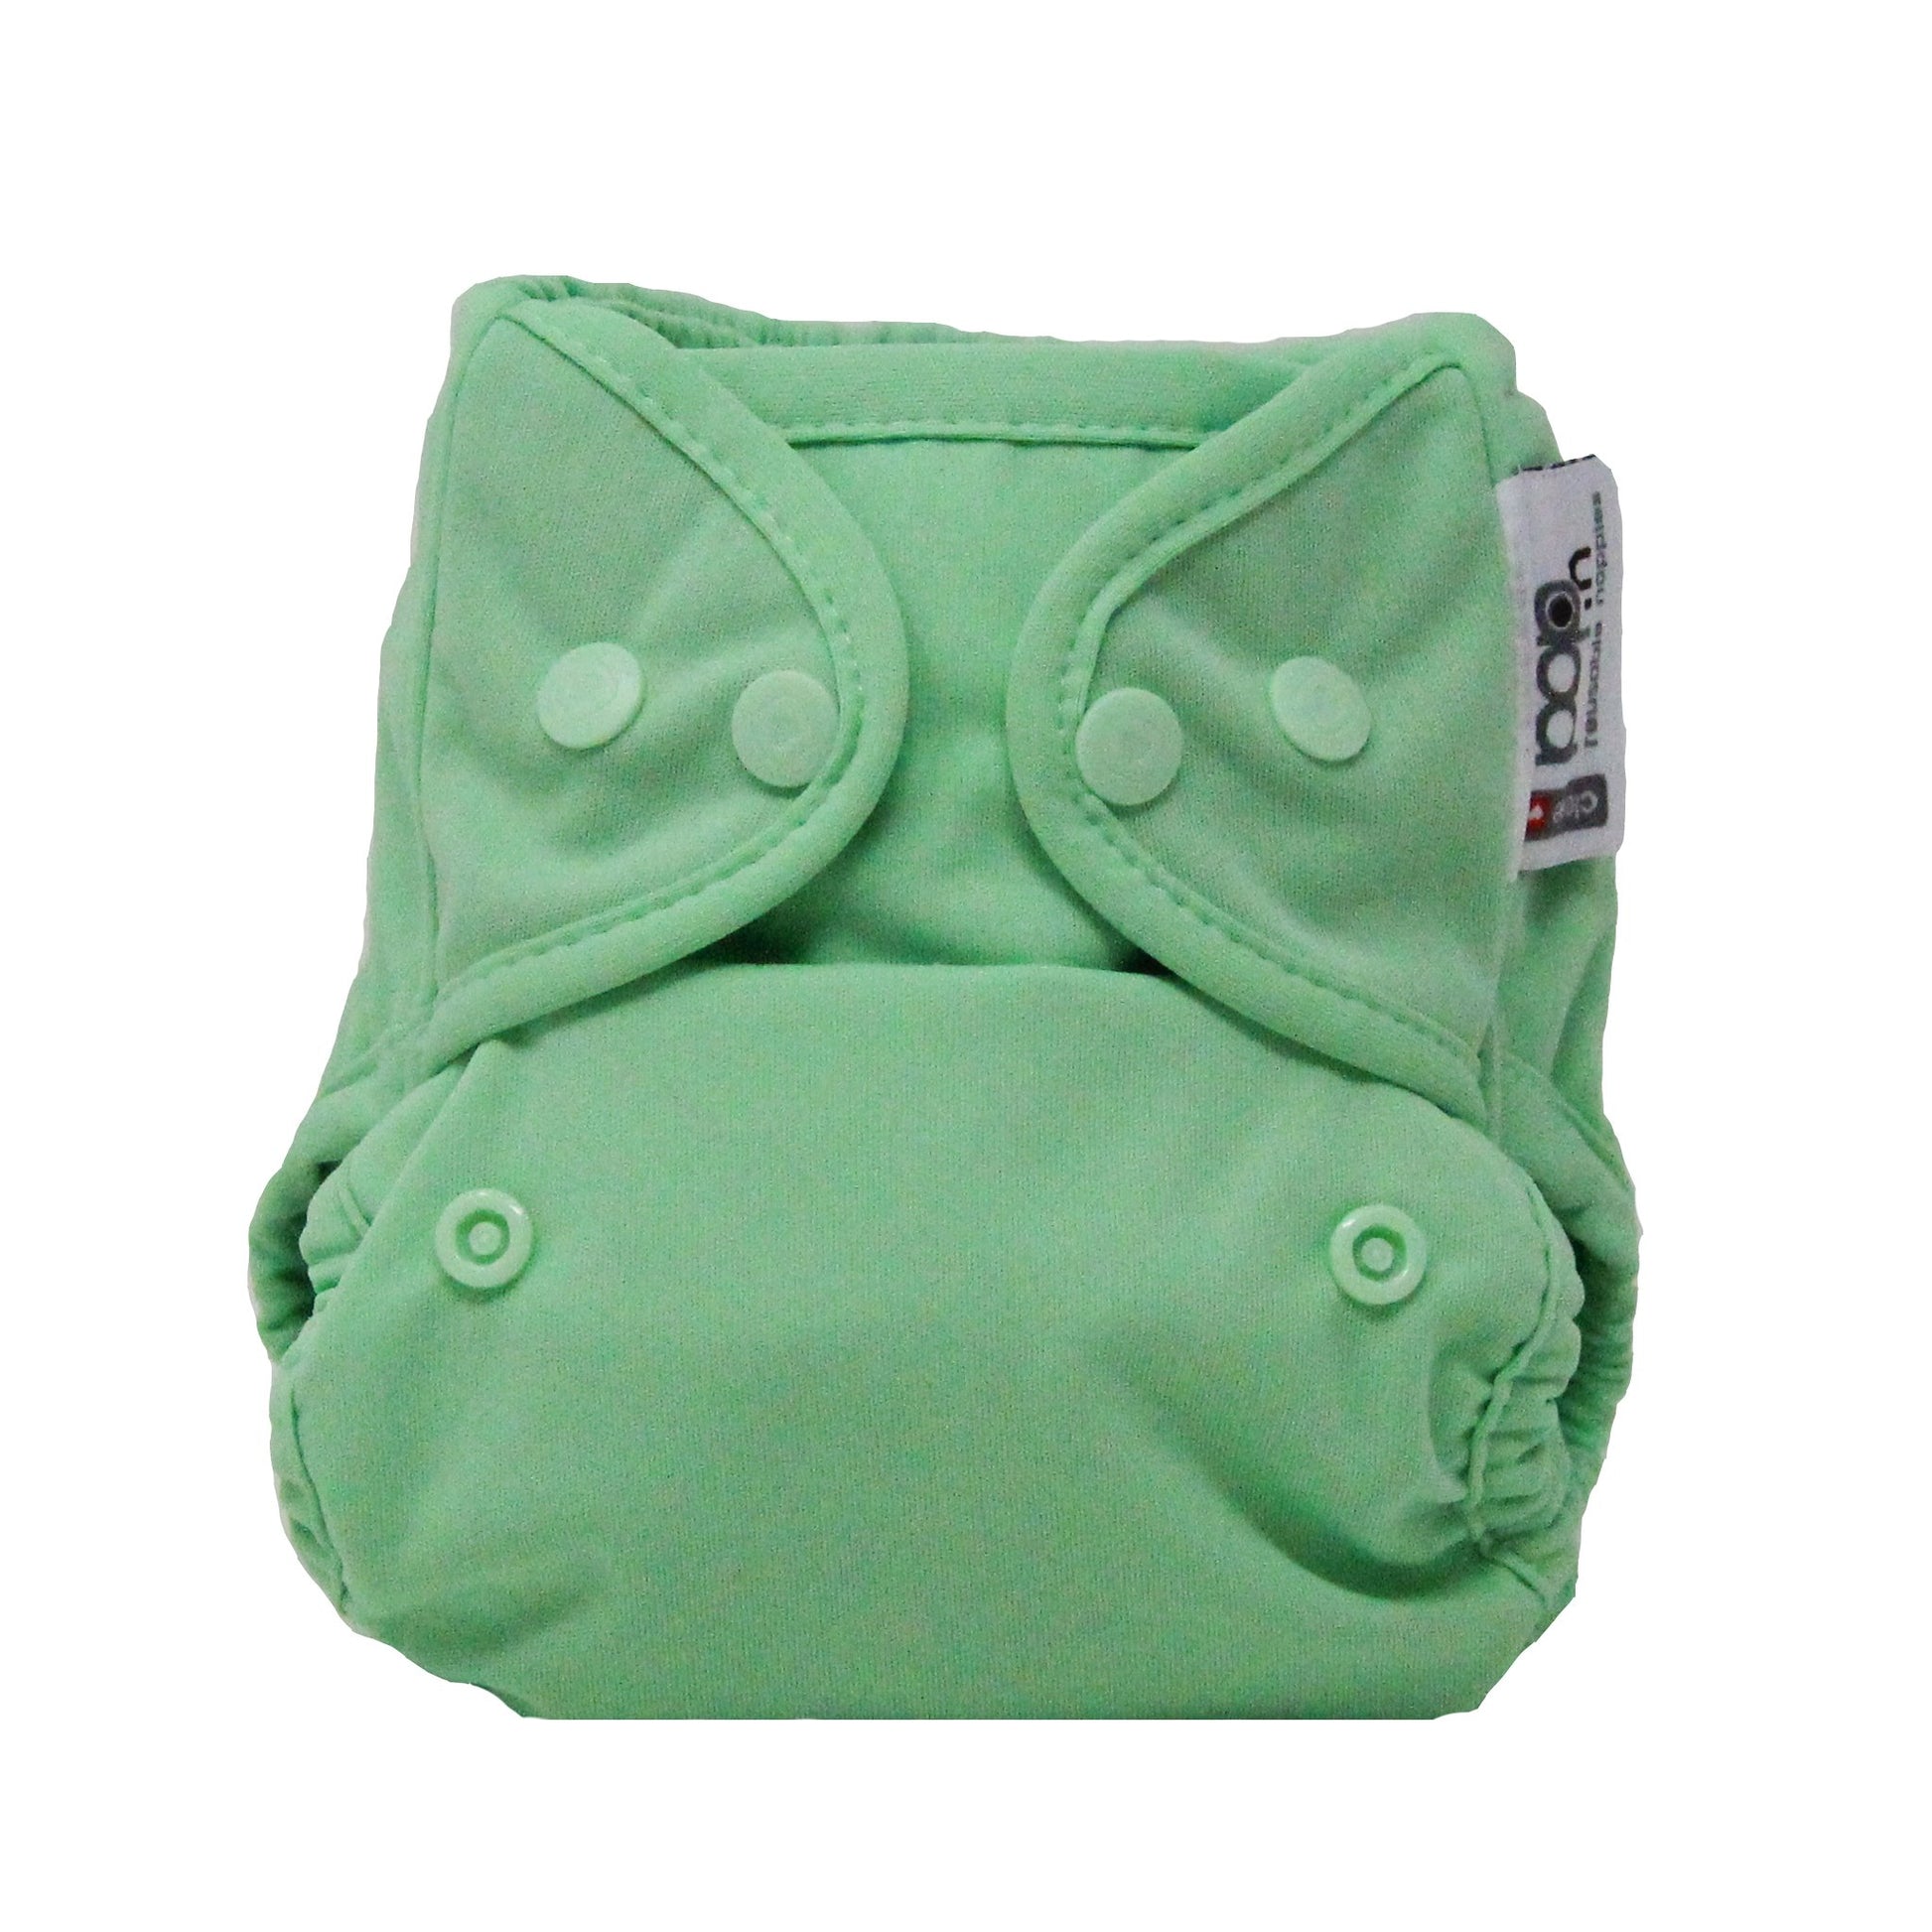 Image shows a pale green reusable cloth nappy with popper fastening.